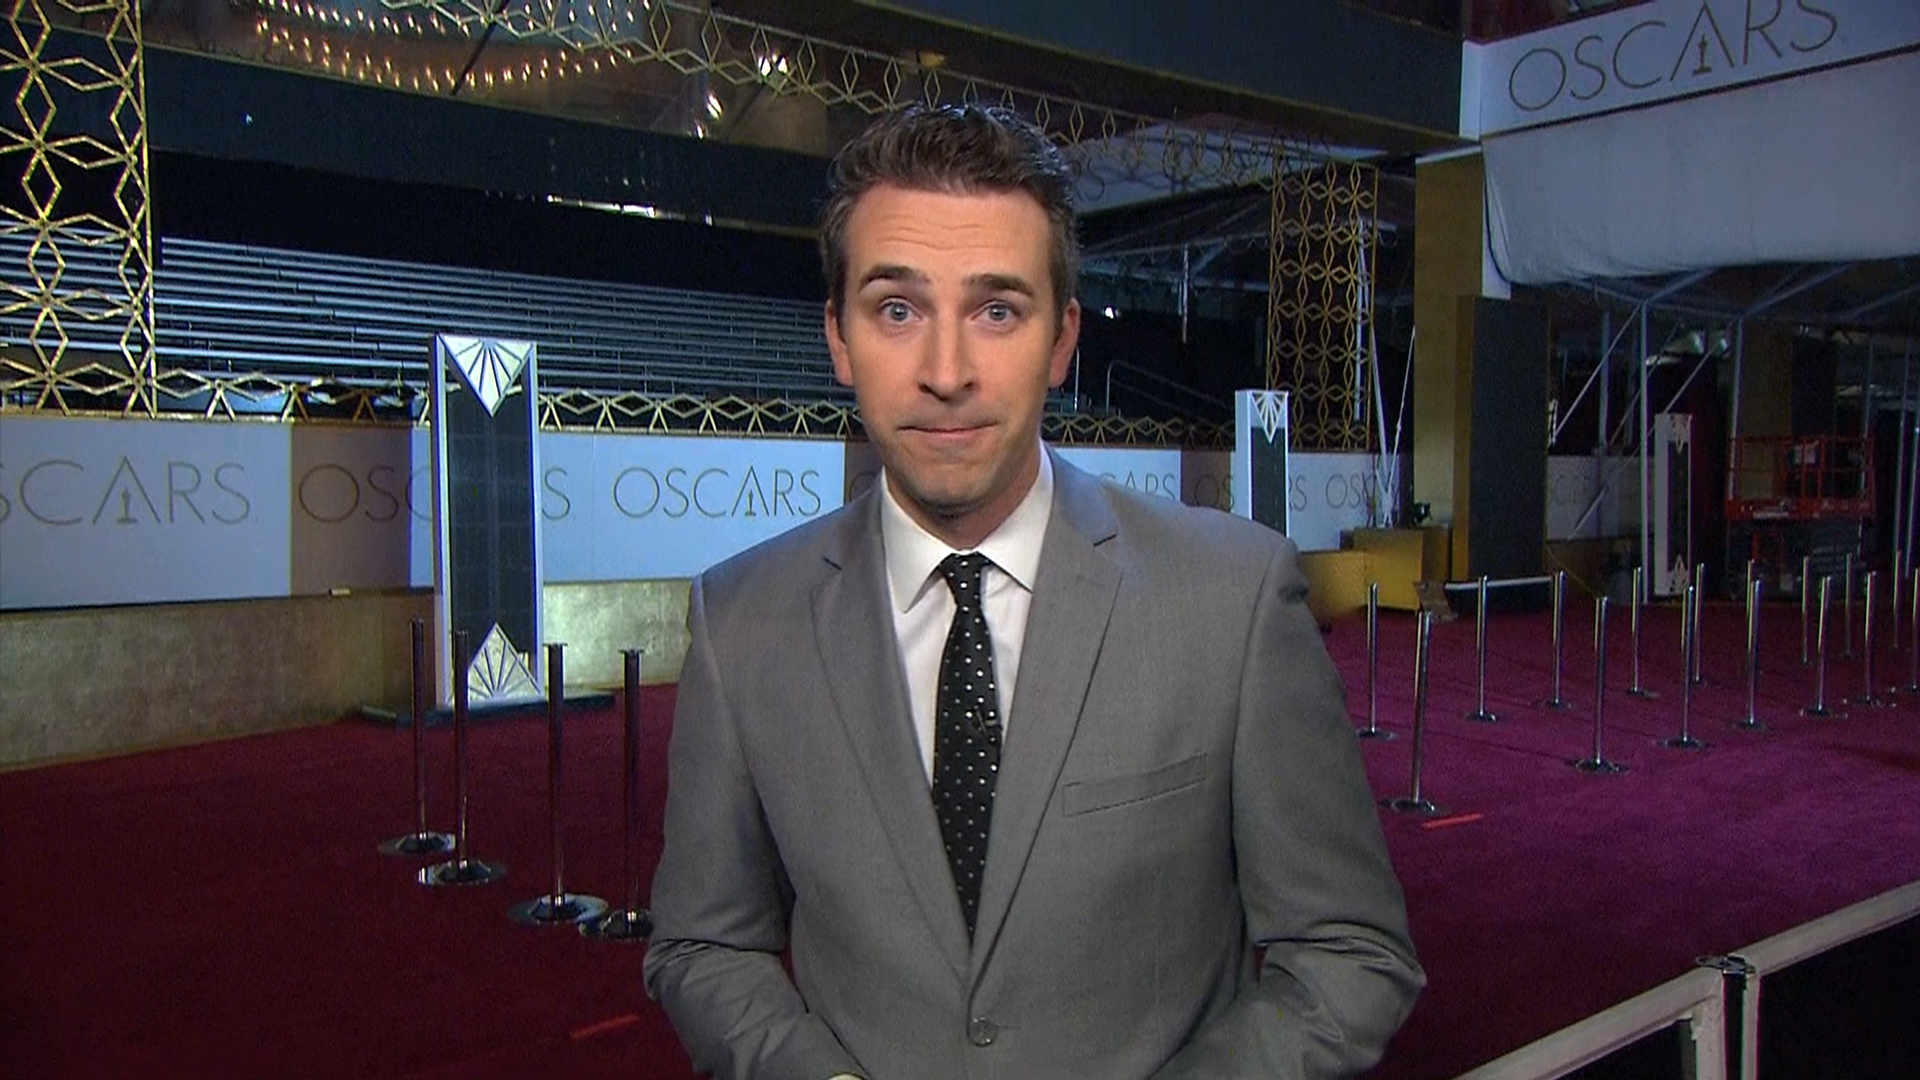 Inside the Oscars: Will previous shows predict tonight’s winners? - TODAY.com1920 x 1080